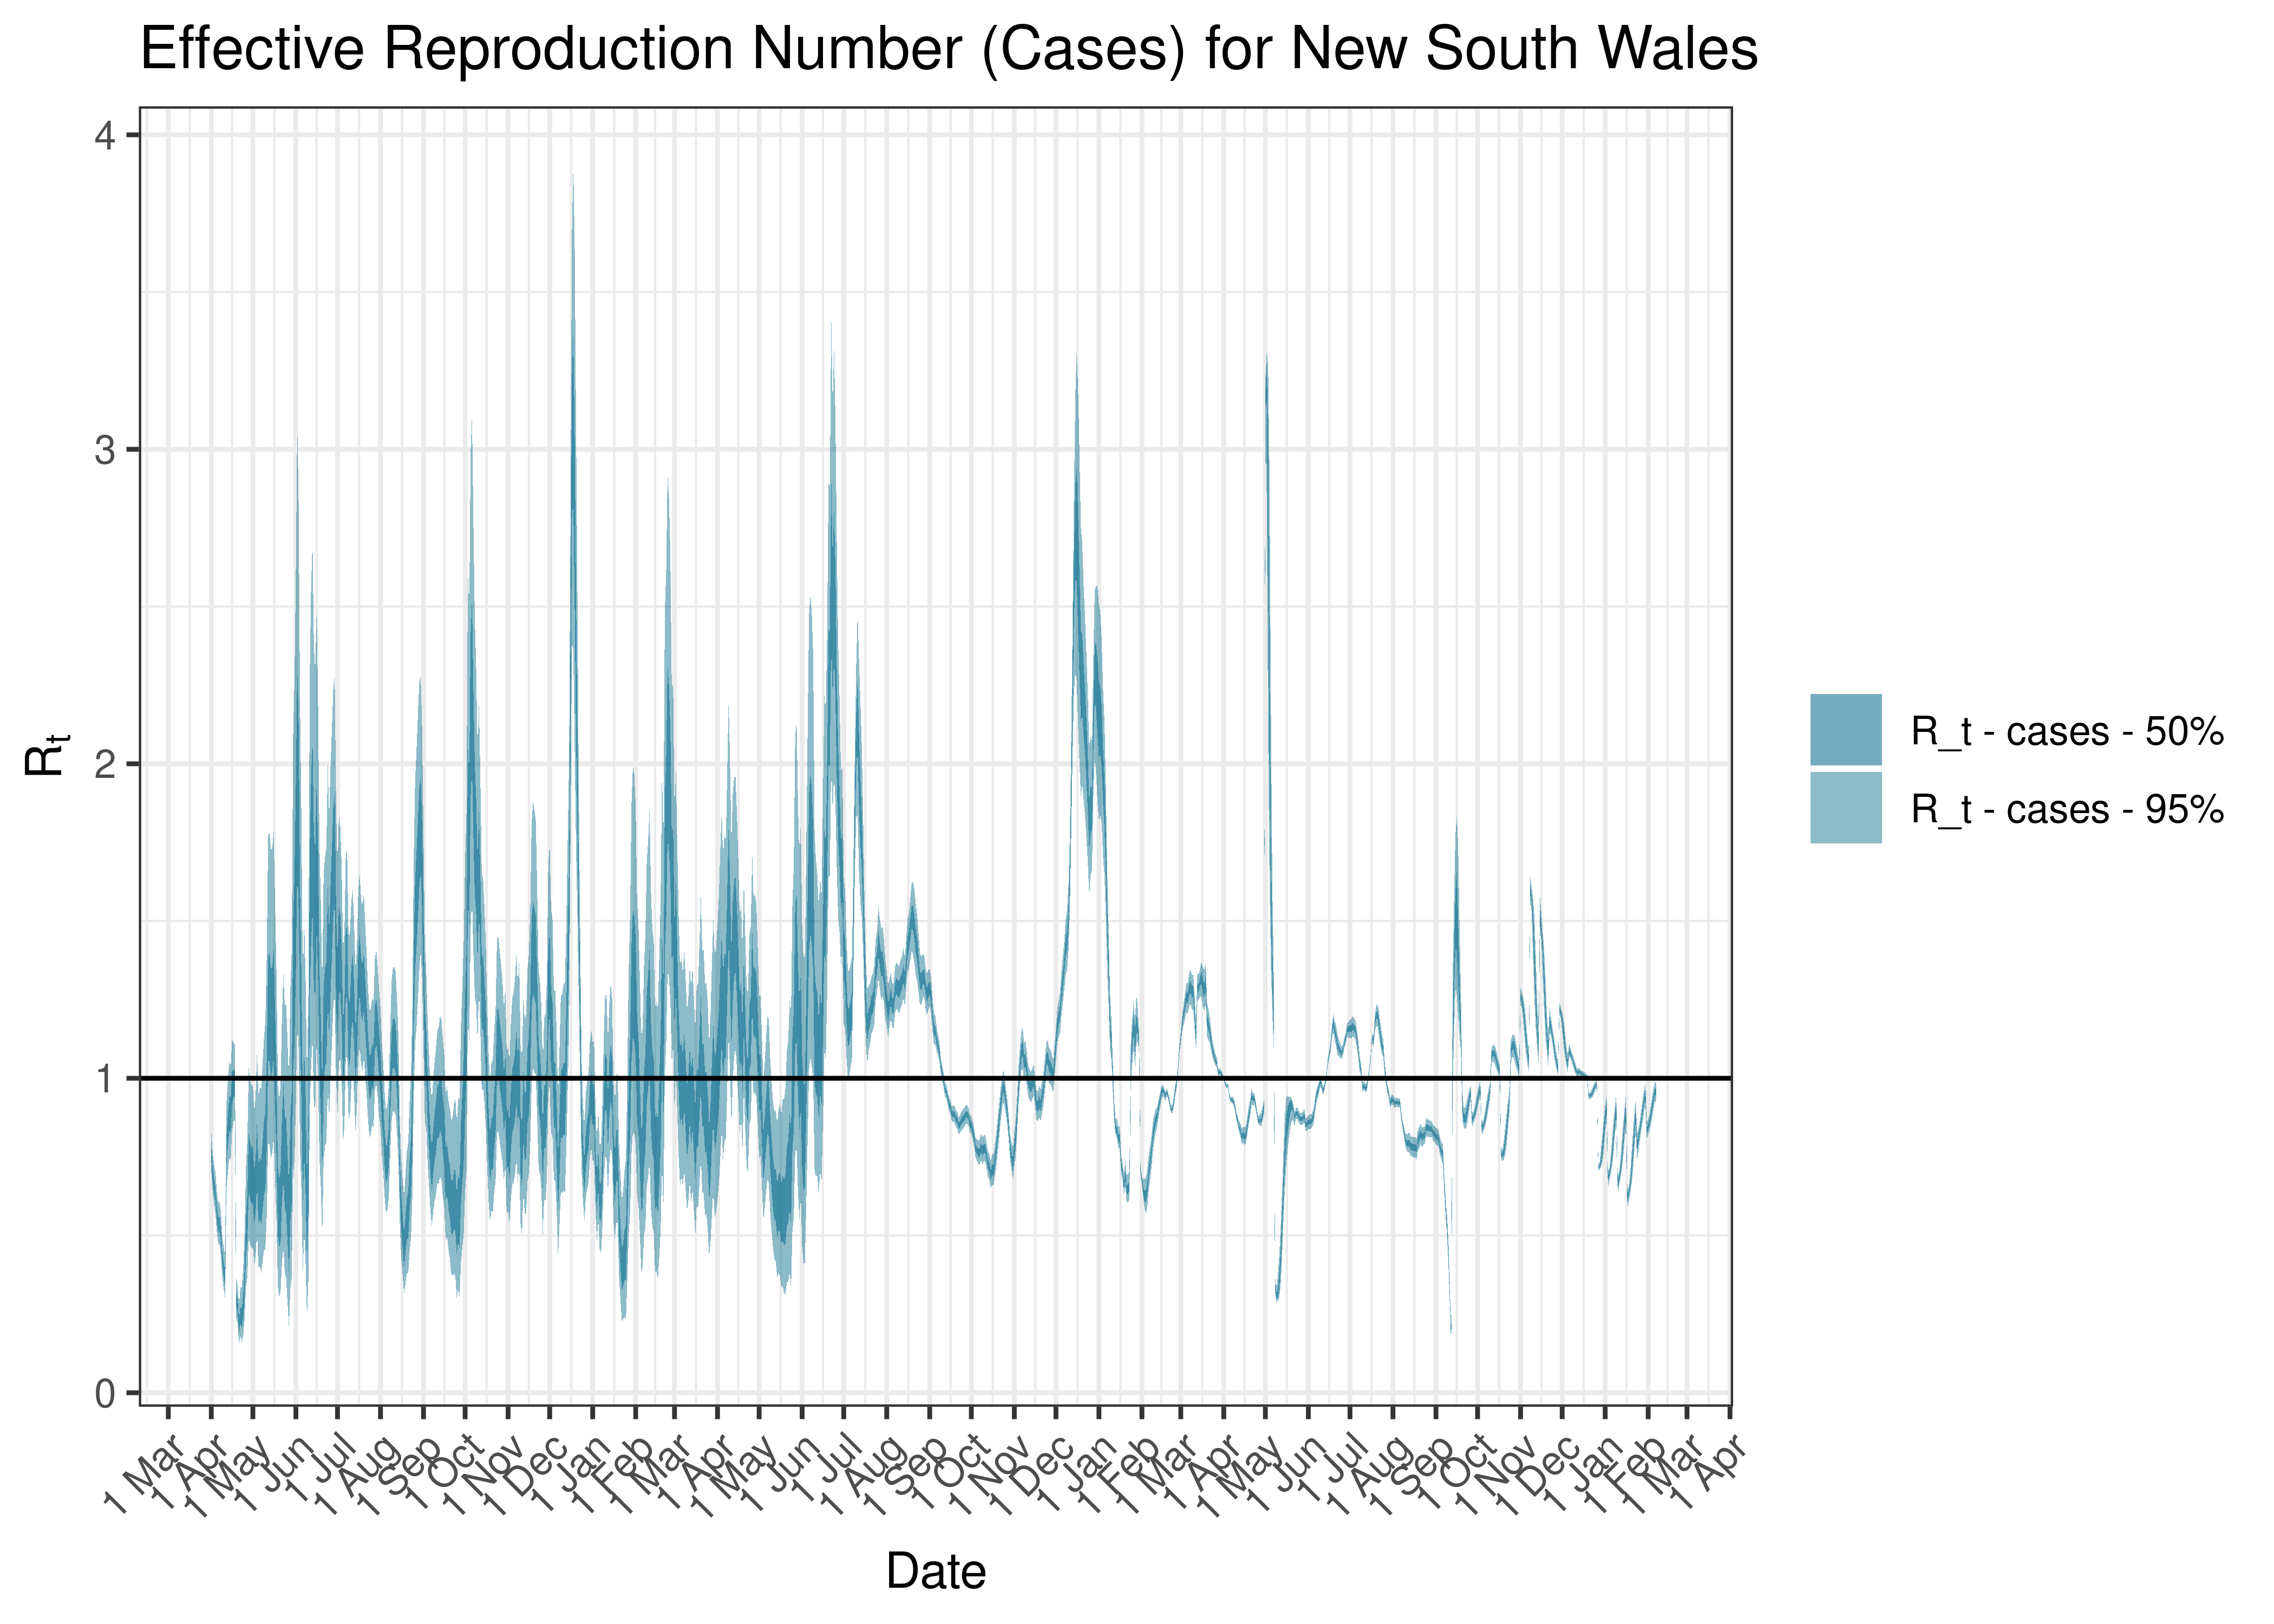 Estimated Effective Reproduction Number Based on Cases for New South Wales since 1 April 2020